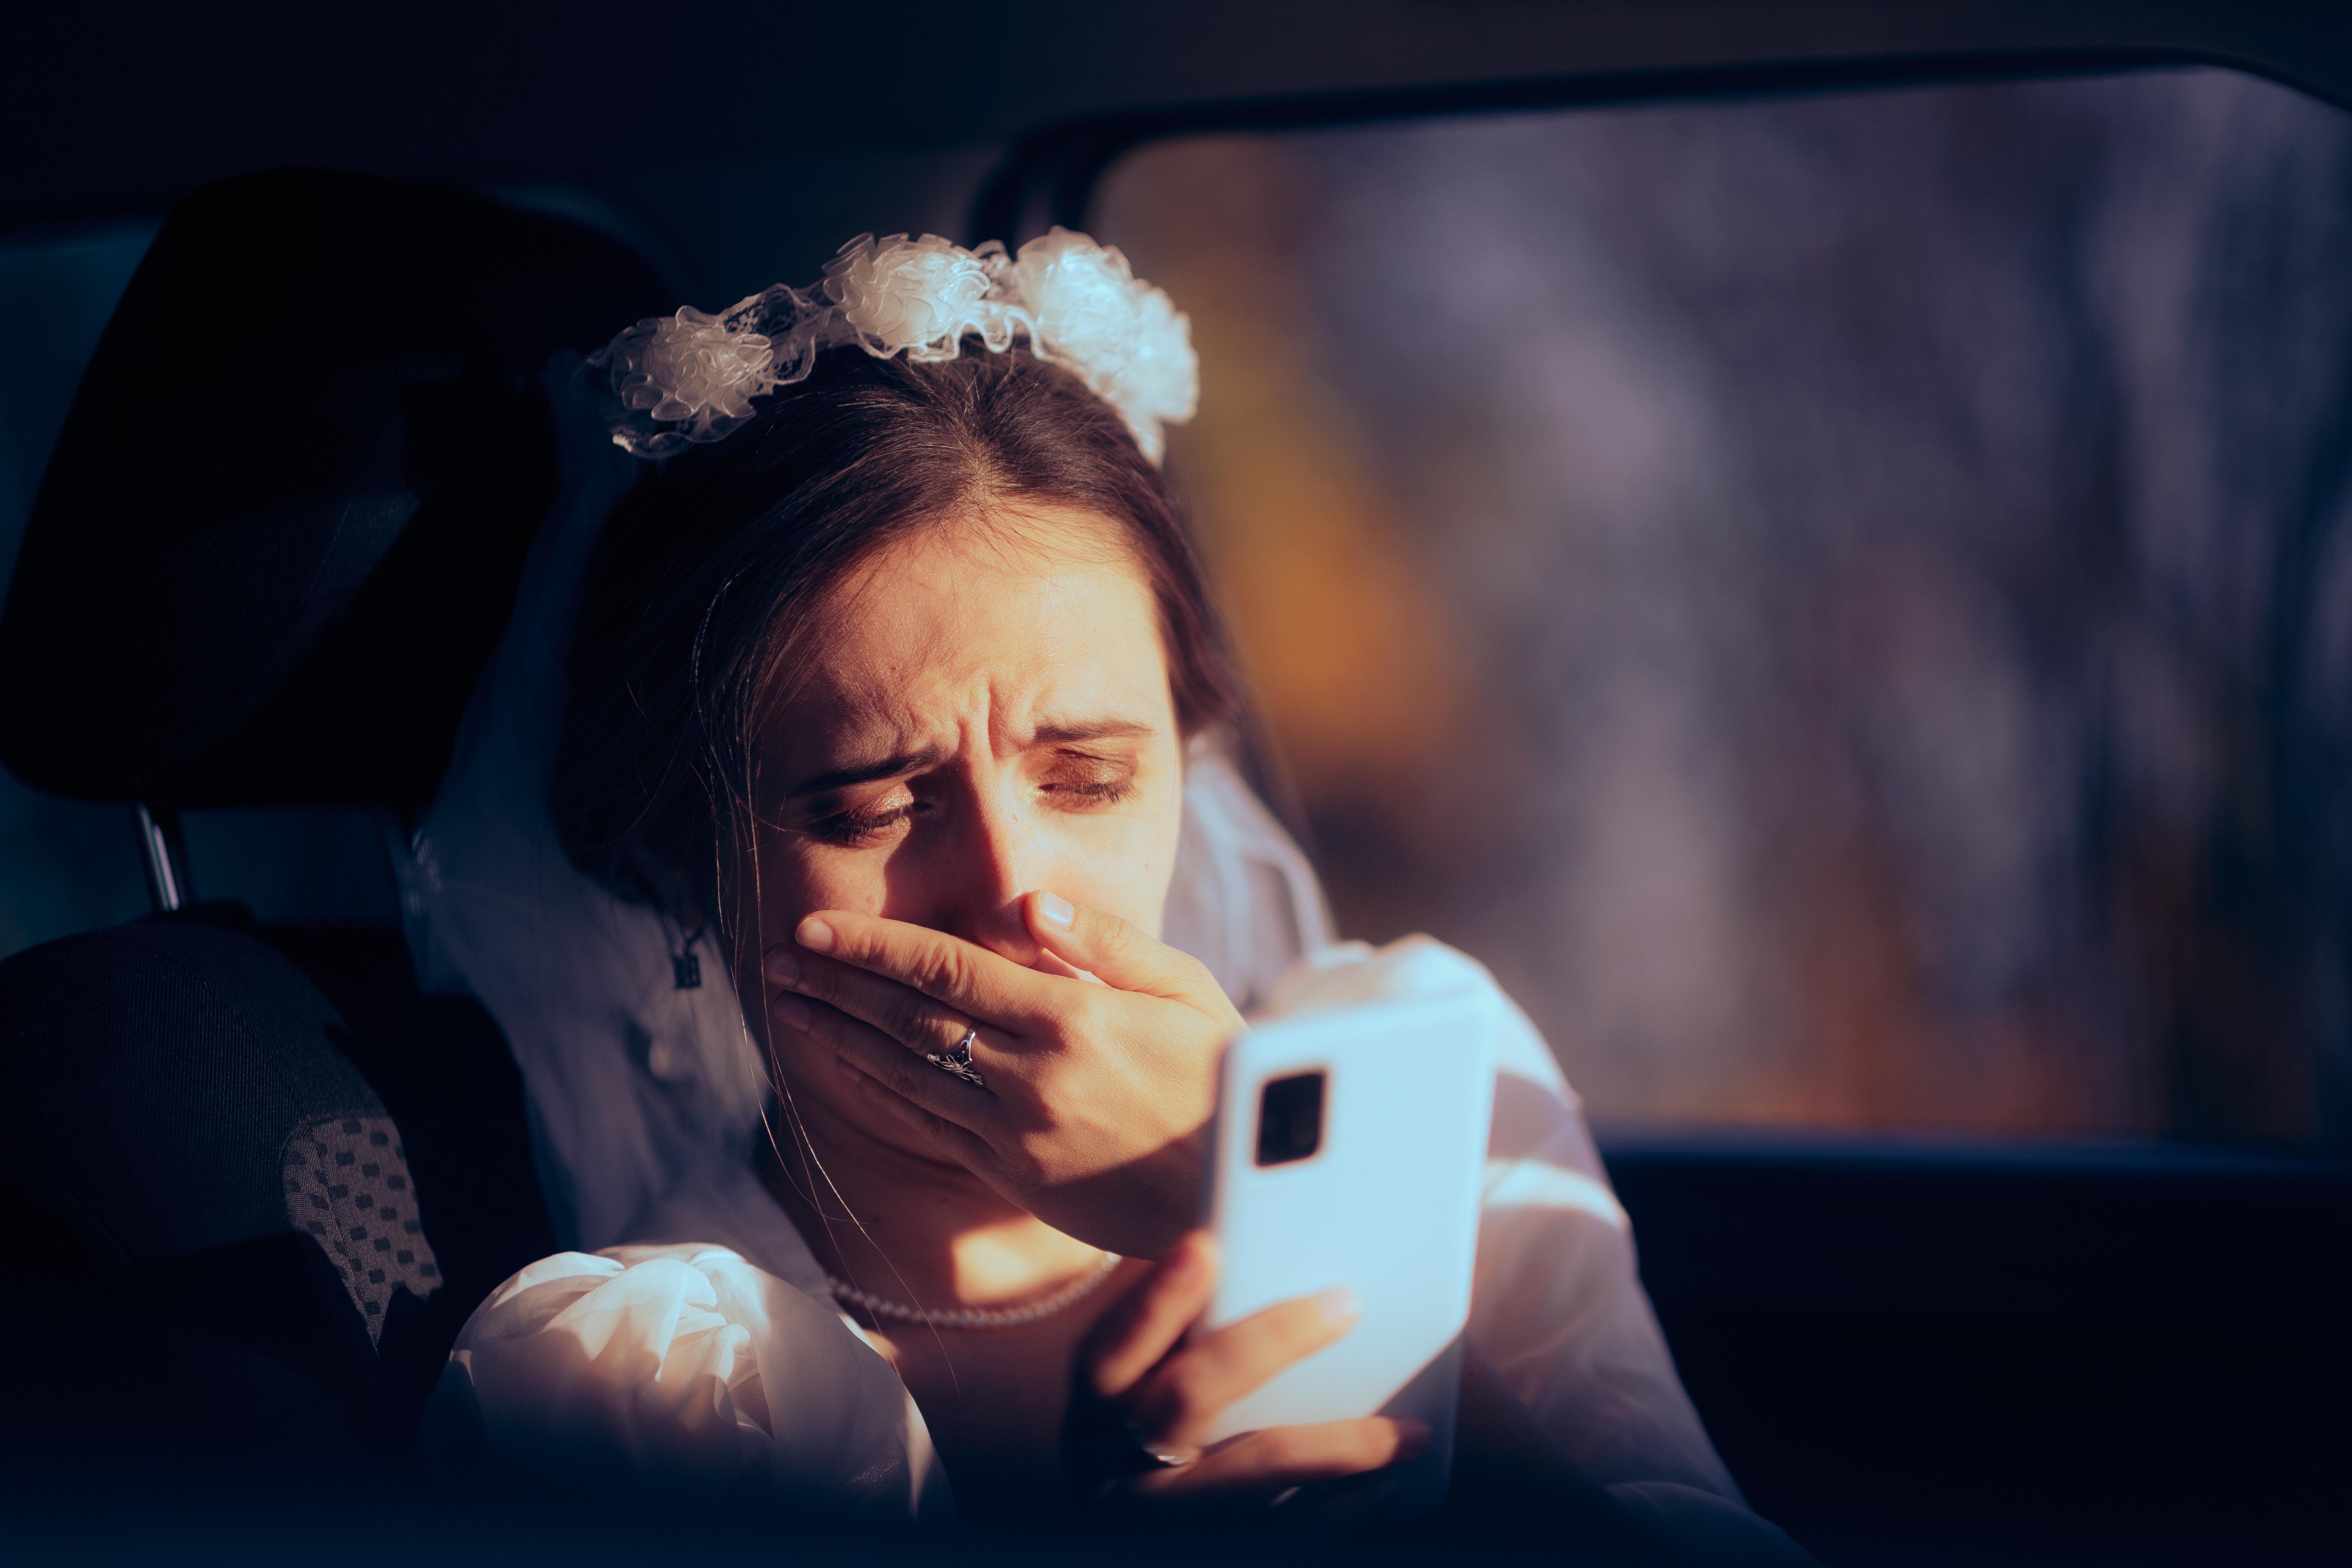 A crying bride staring at her smartphone | Source: Shutterstock